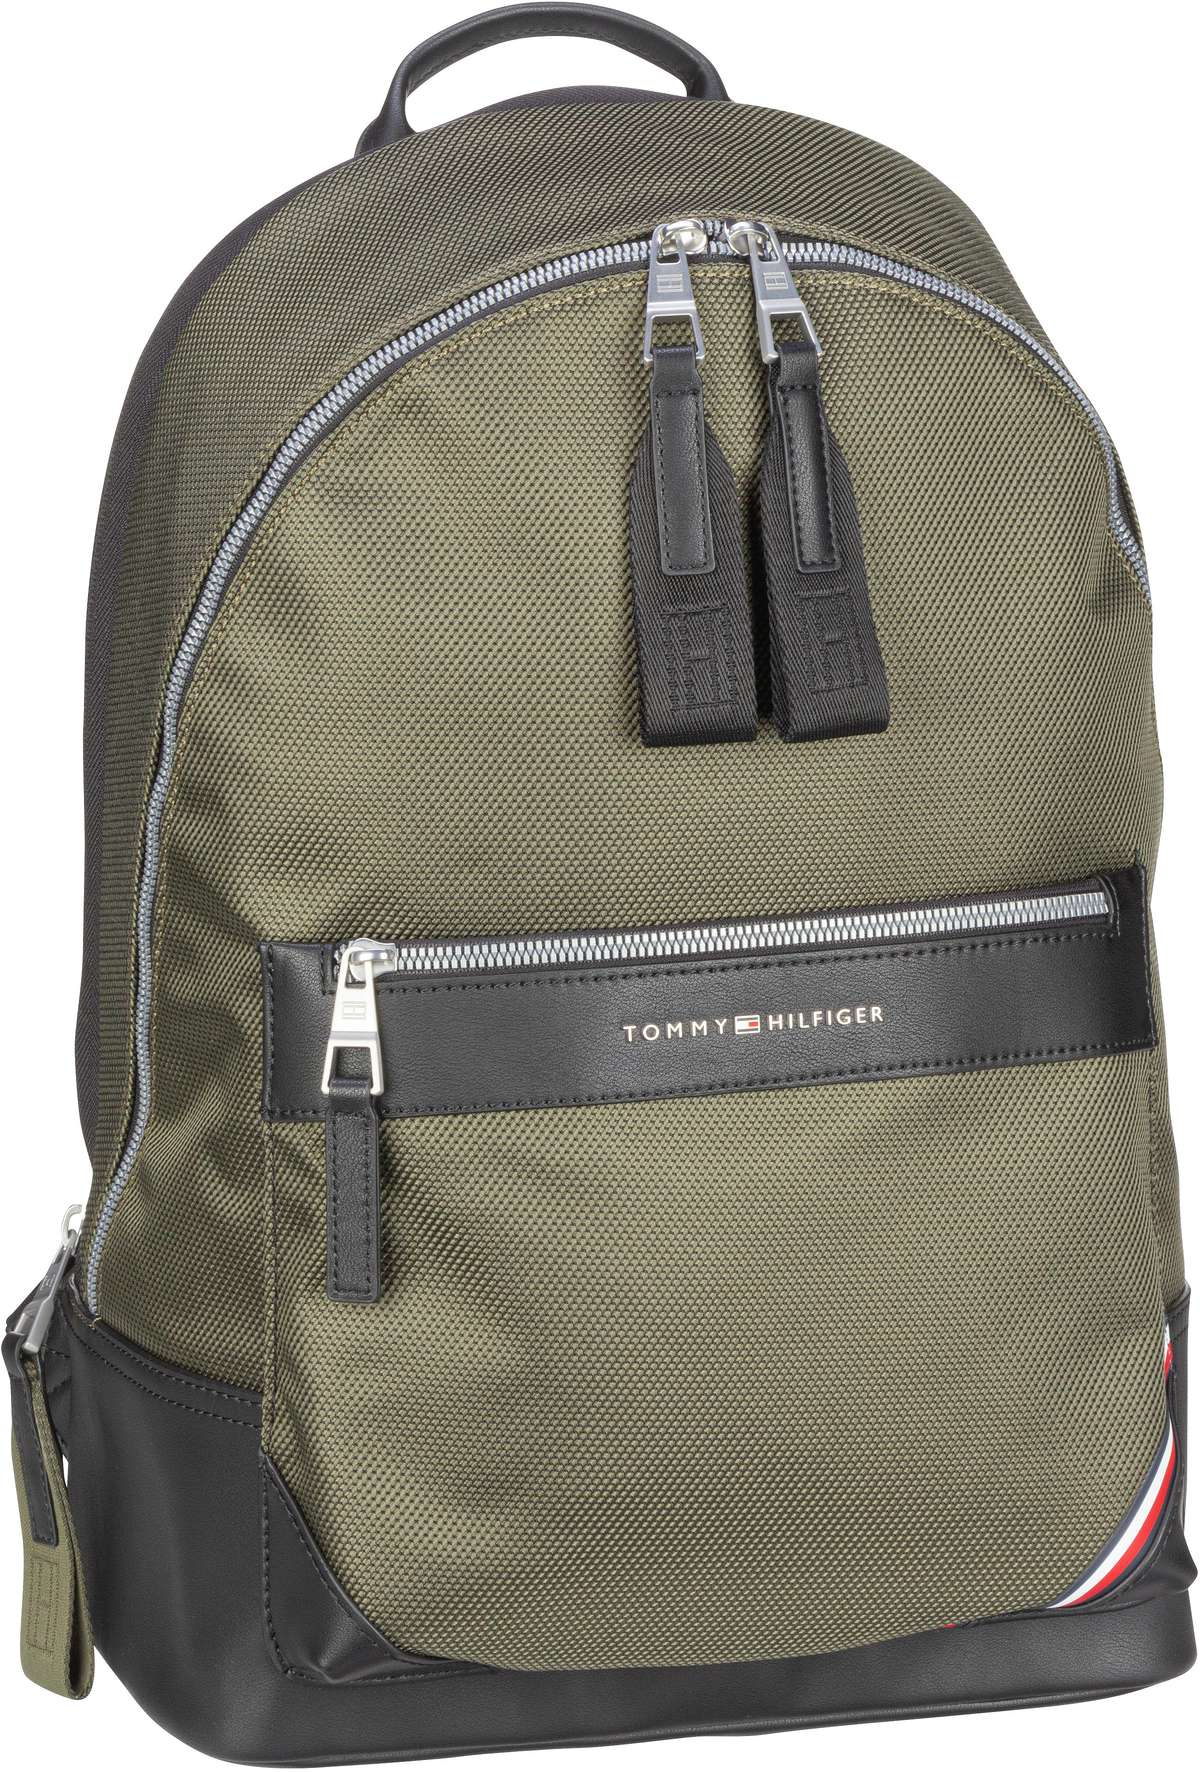 Tommy Hilfiger 1985 Nylon Backpack SP22 - Army Green